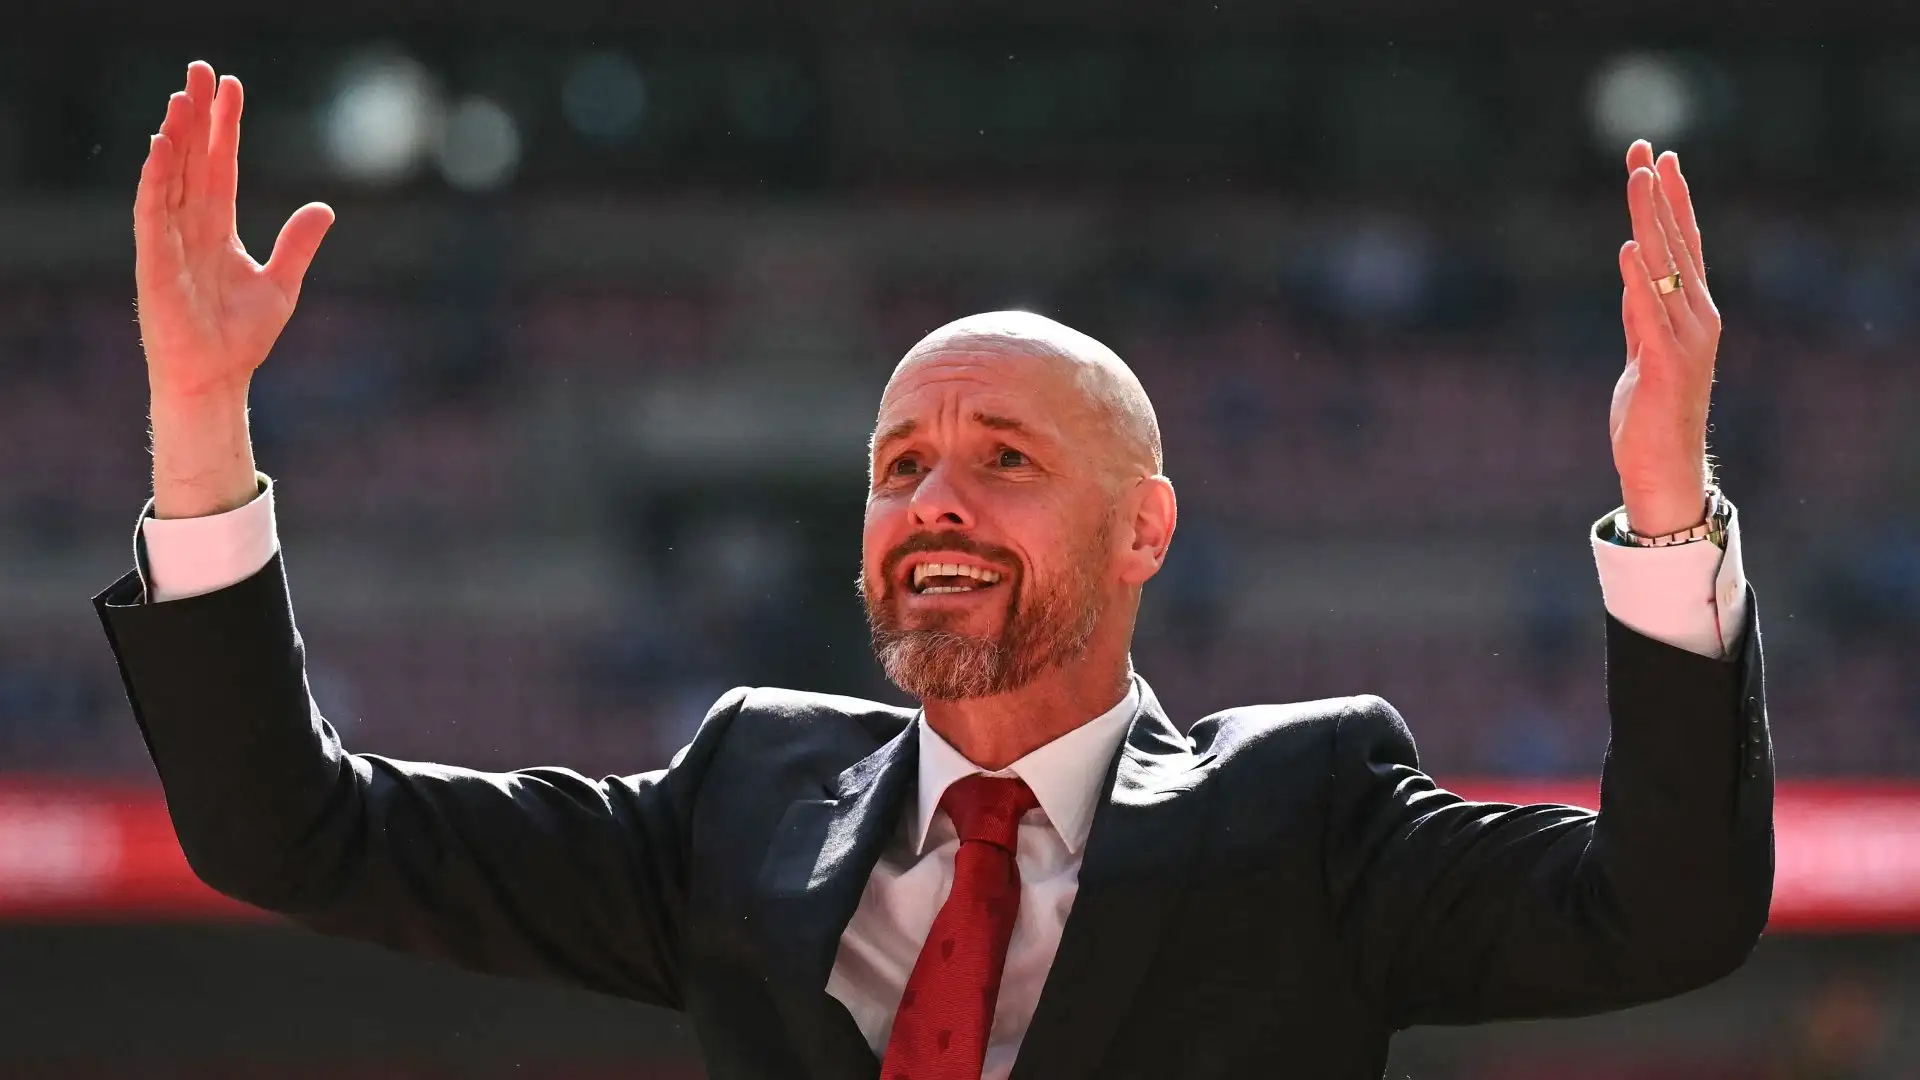 Revealed: Erik ten Hag demanding 'swift' decision on Man Utd position as FA Cup triumph complicates potential sack call from INEOS